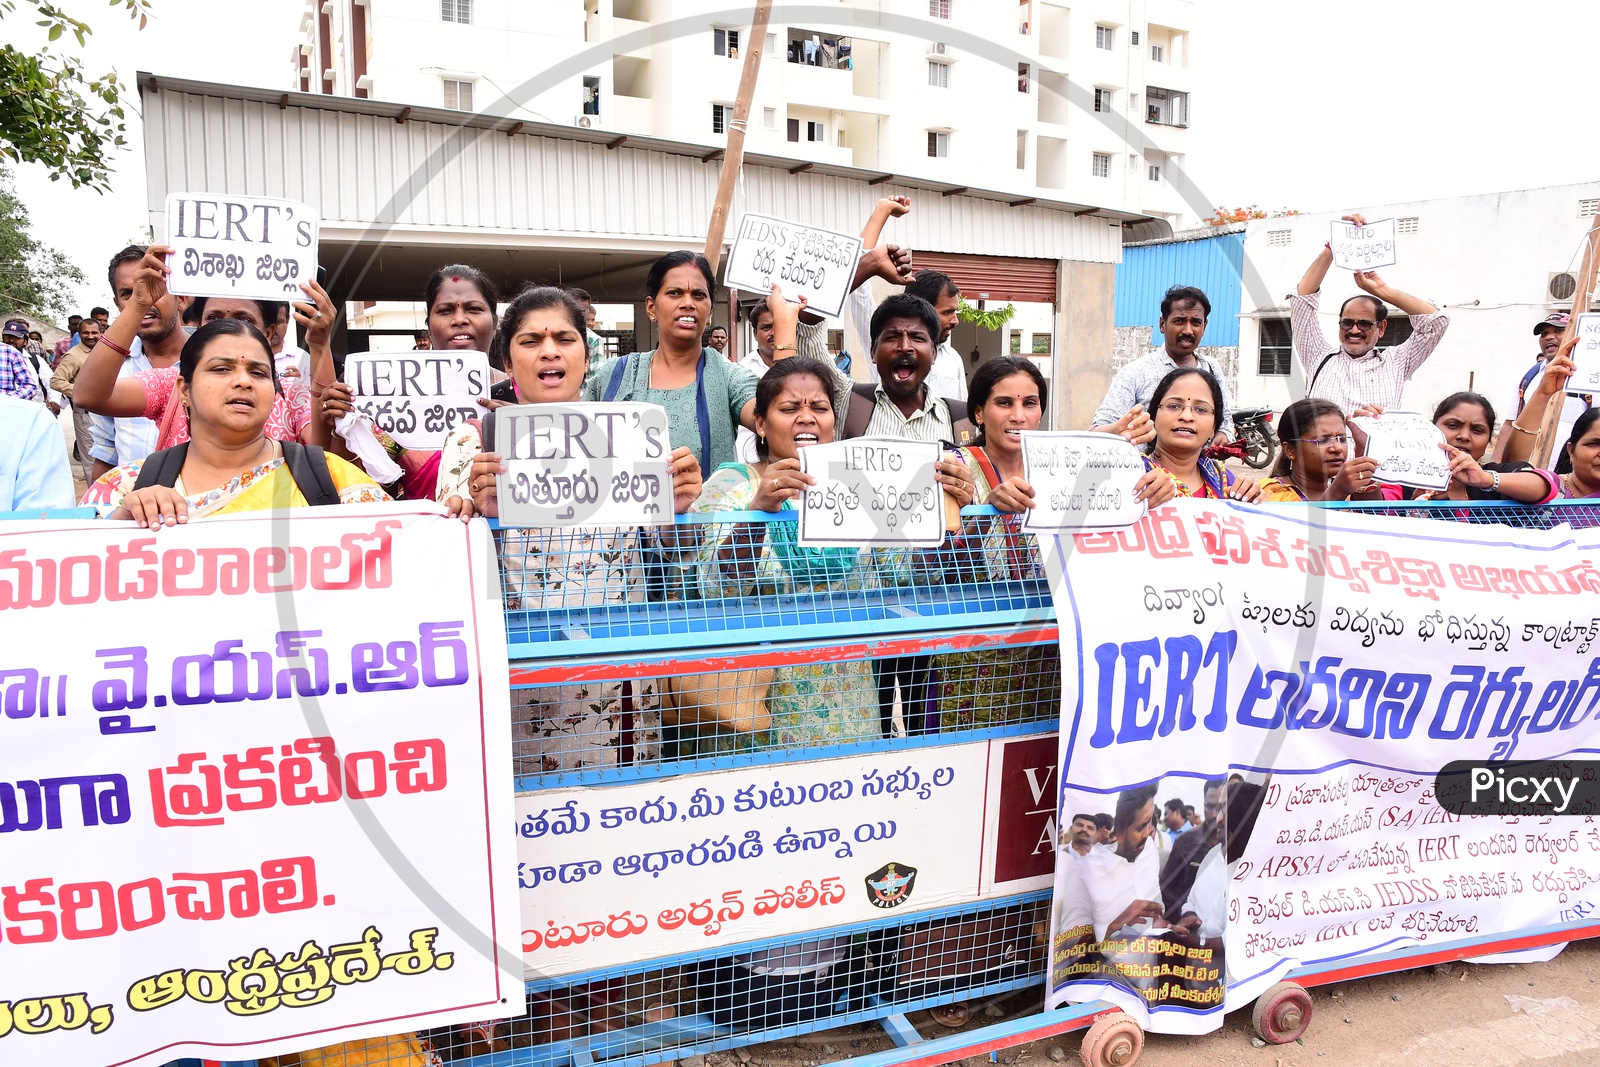 People Protesting With Placards  in a Rally , IERT's Employees Protesting On Roads